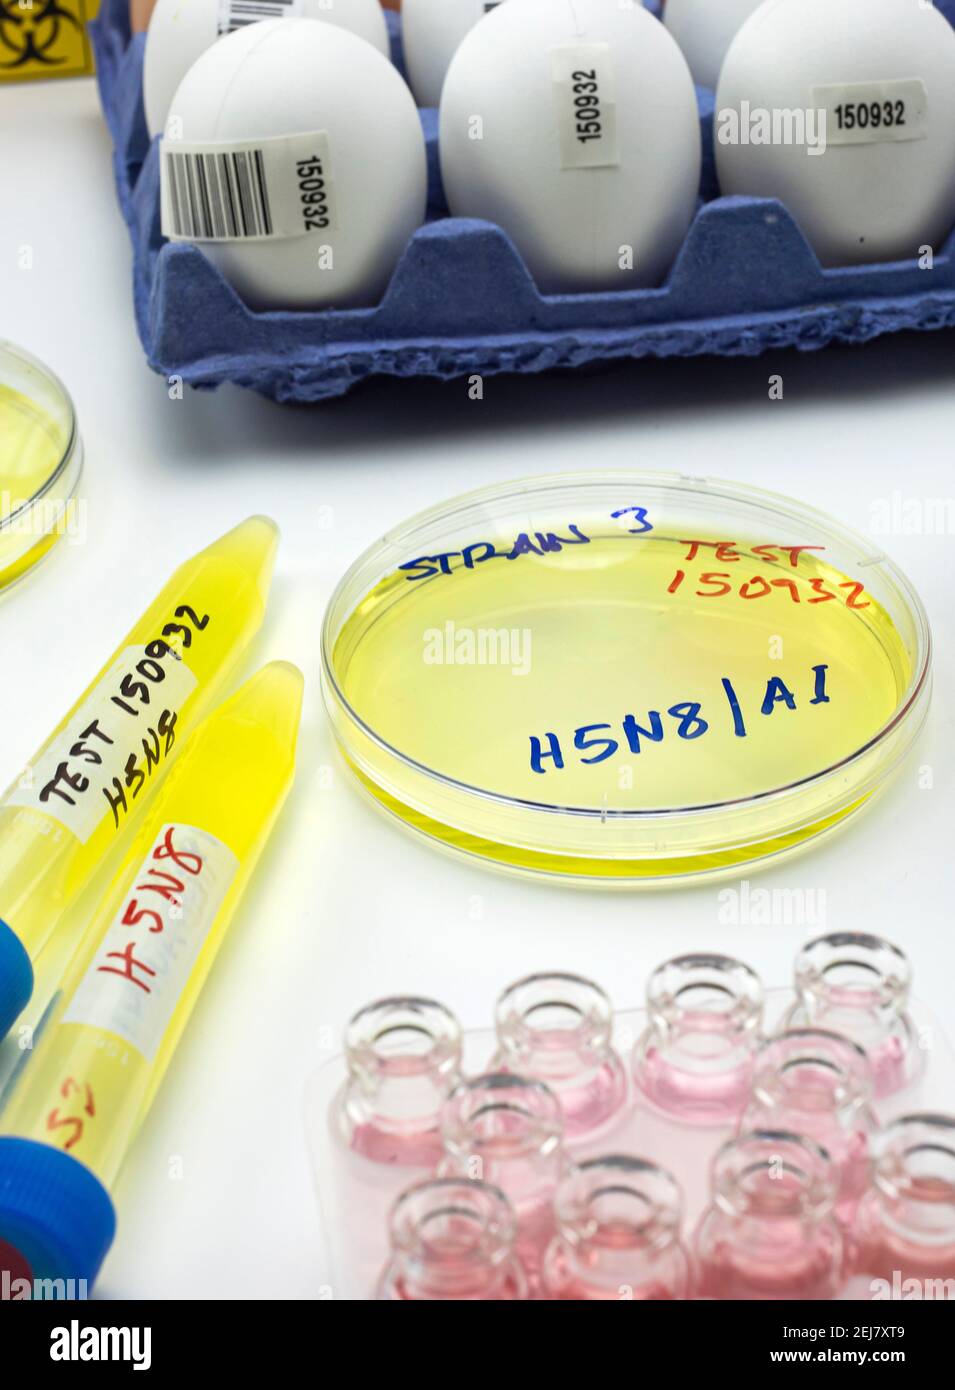 new strain of H5N8 avian influenza infected in humans, petri dish with samples, conceptual image Stock Photo